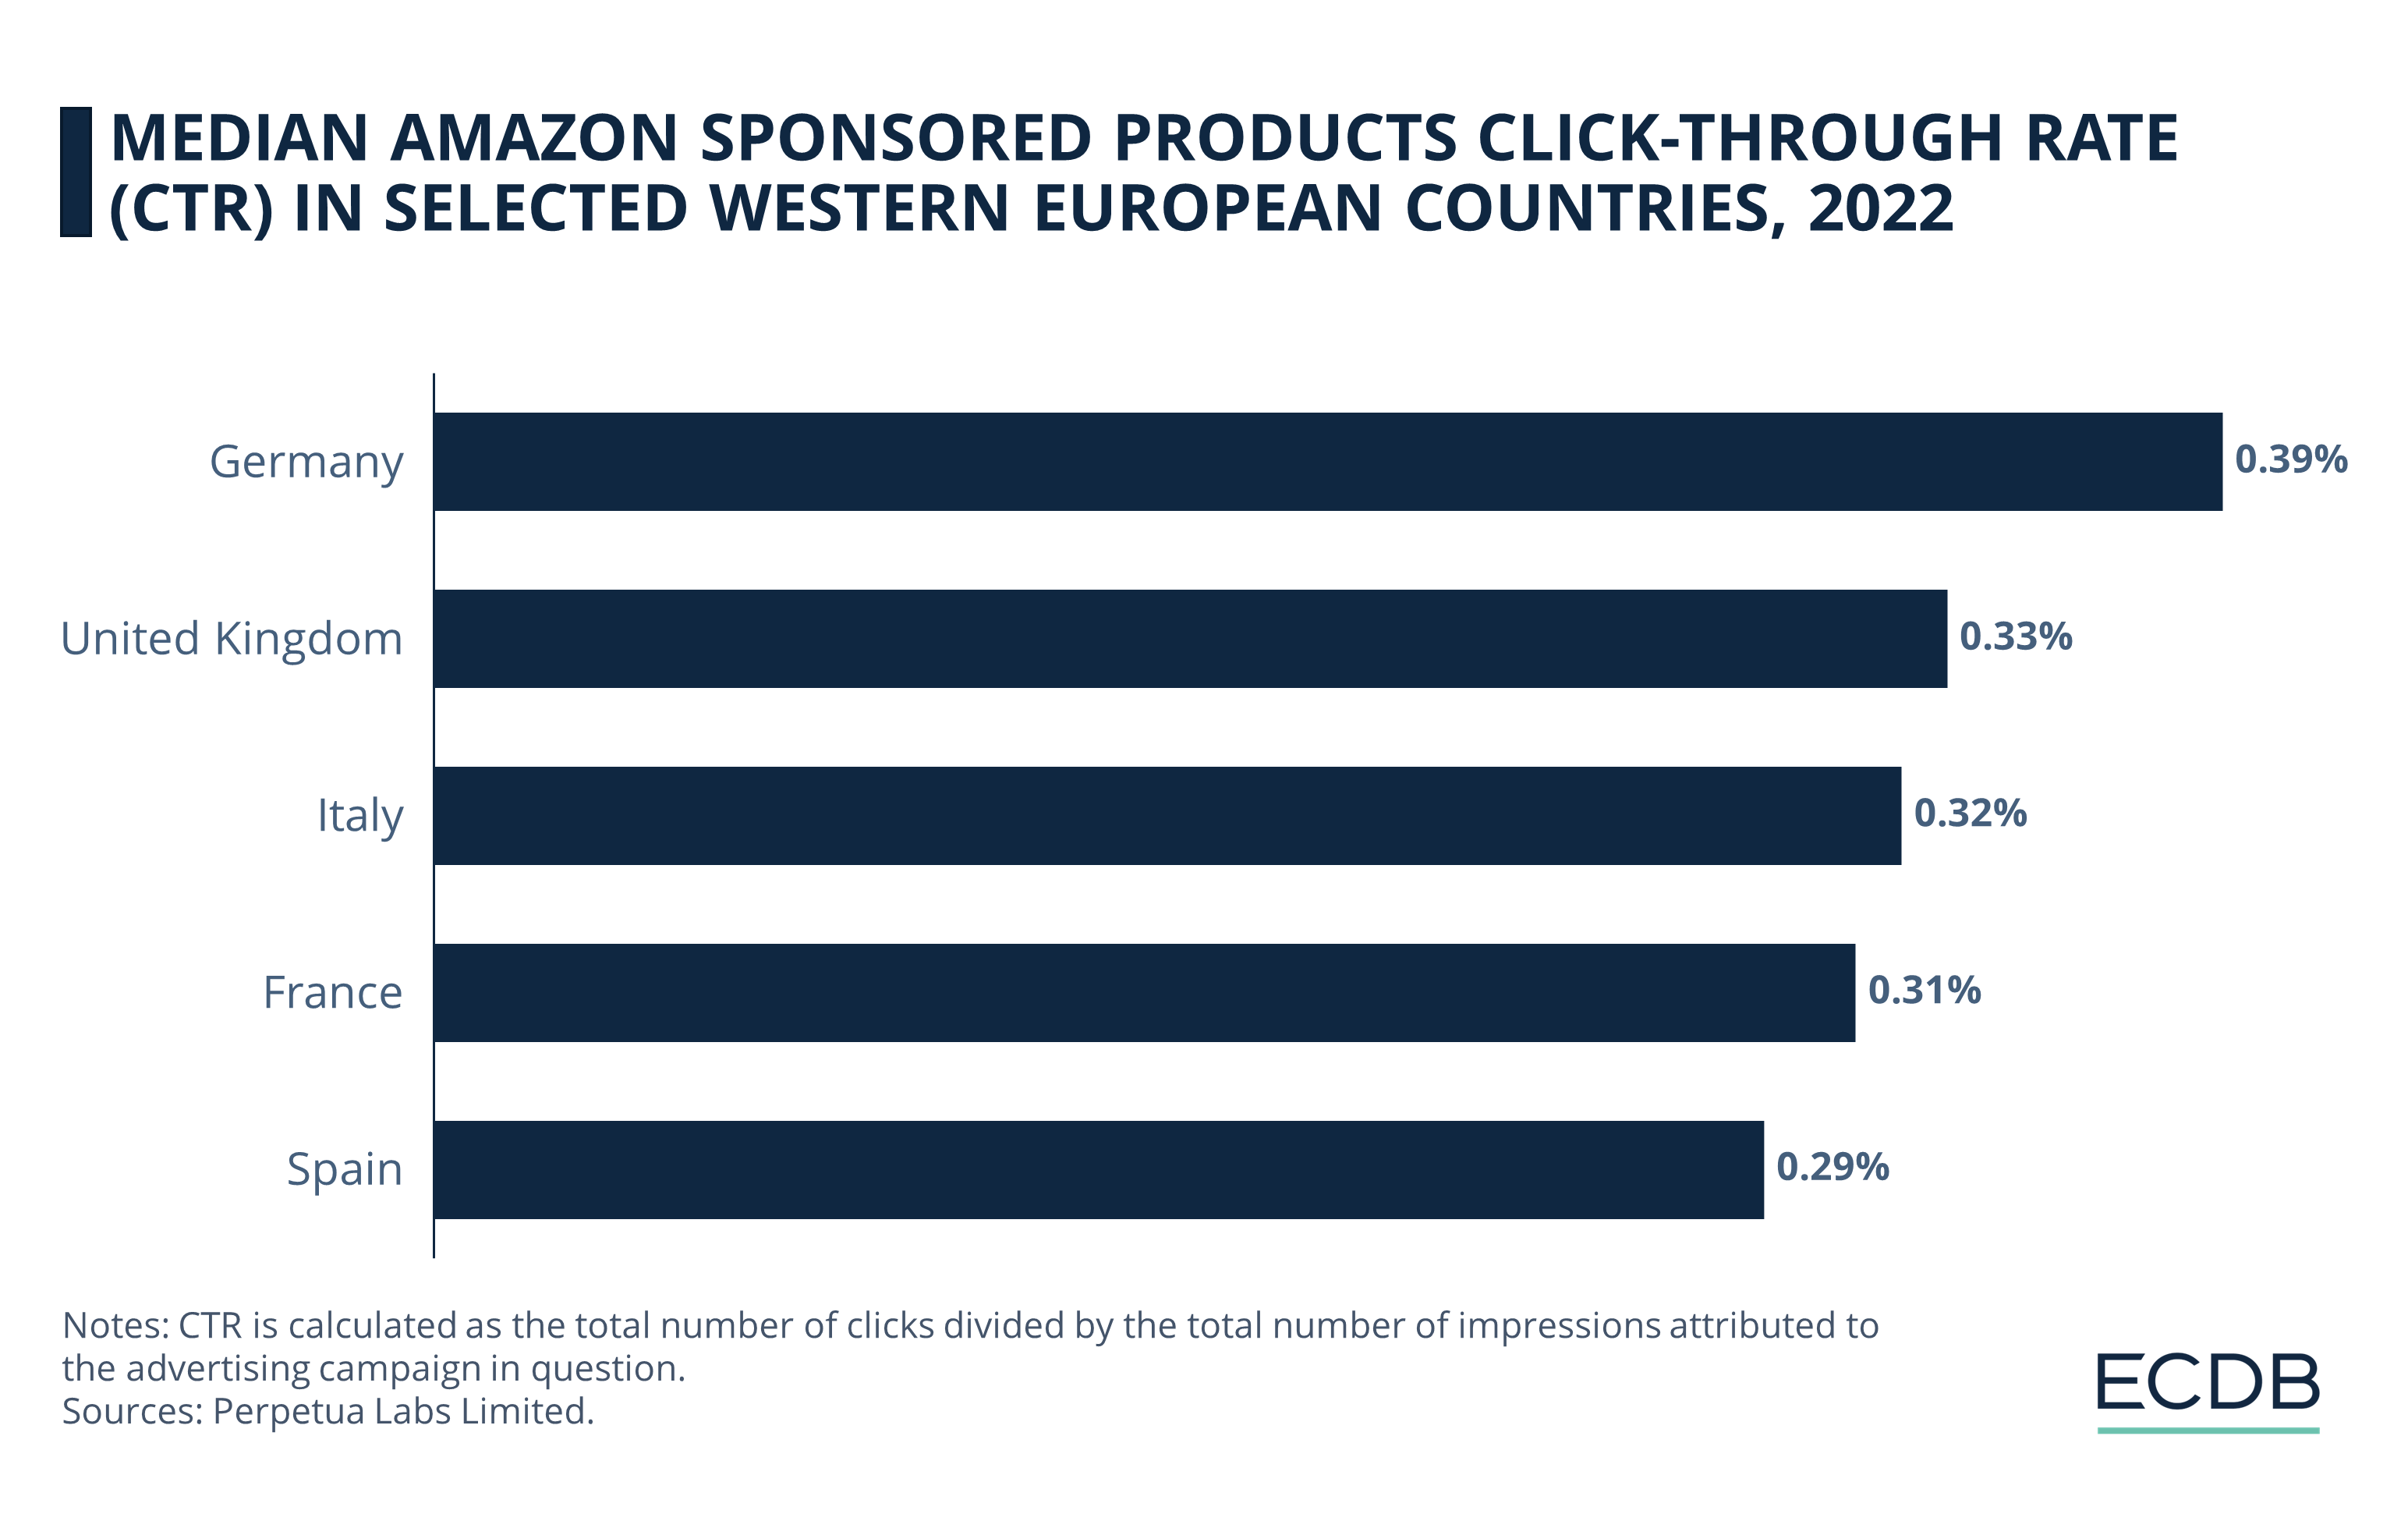 Amazon Median Sponsored Products CTR in Selected Western European Countries